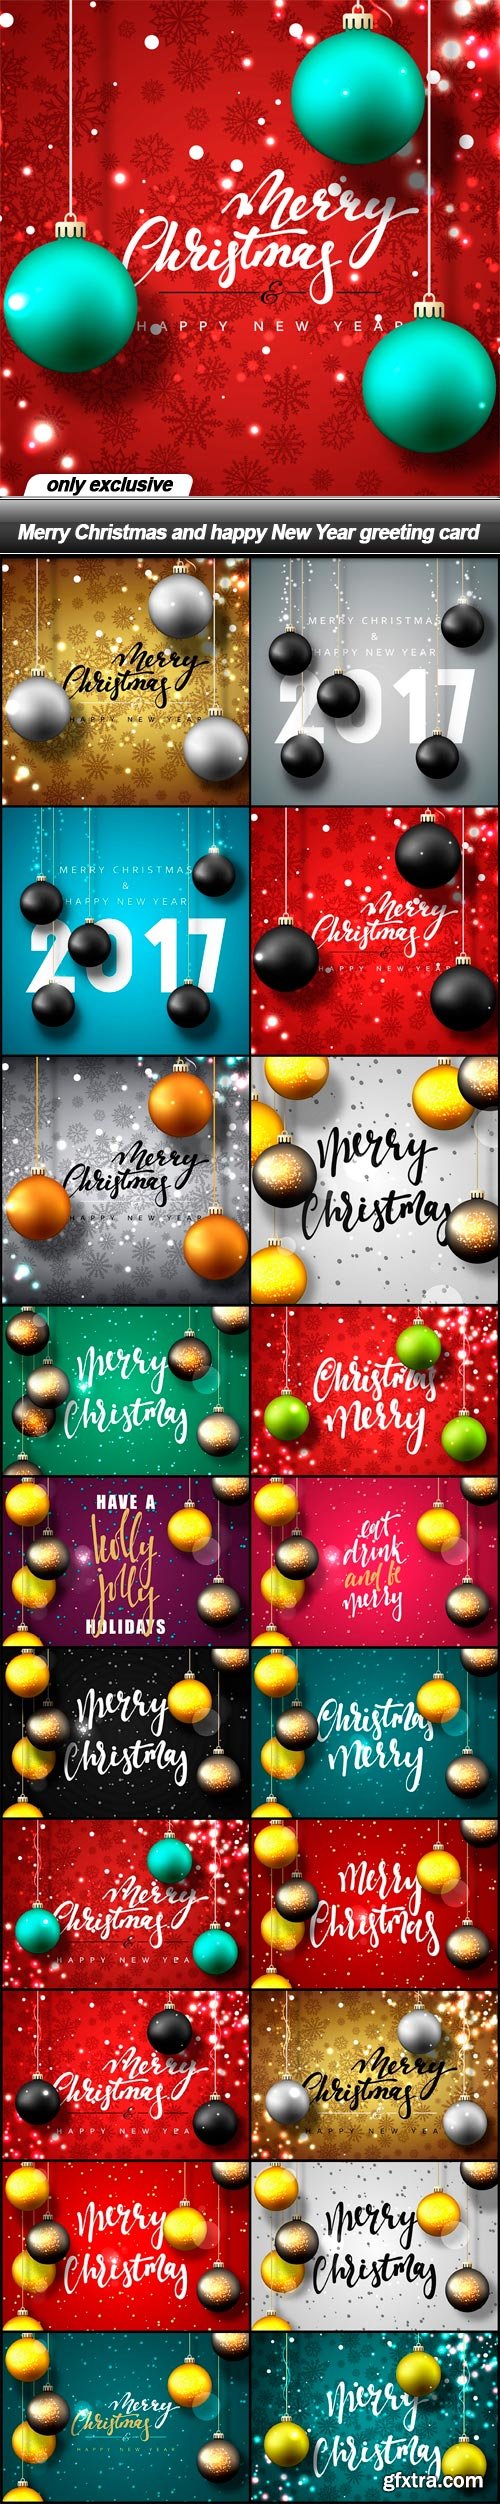 Merry Christmas and happy New Year greeting card - 21 EPS